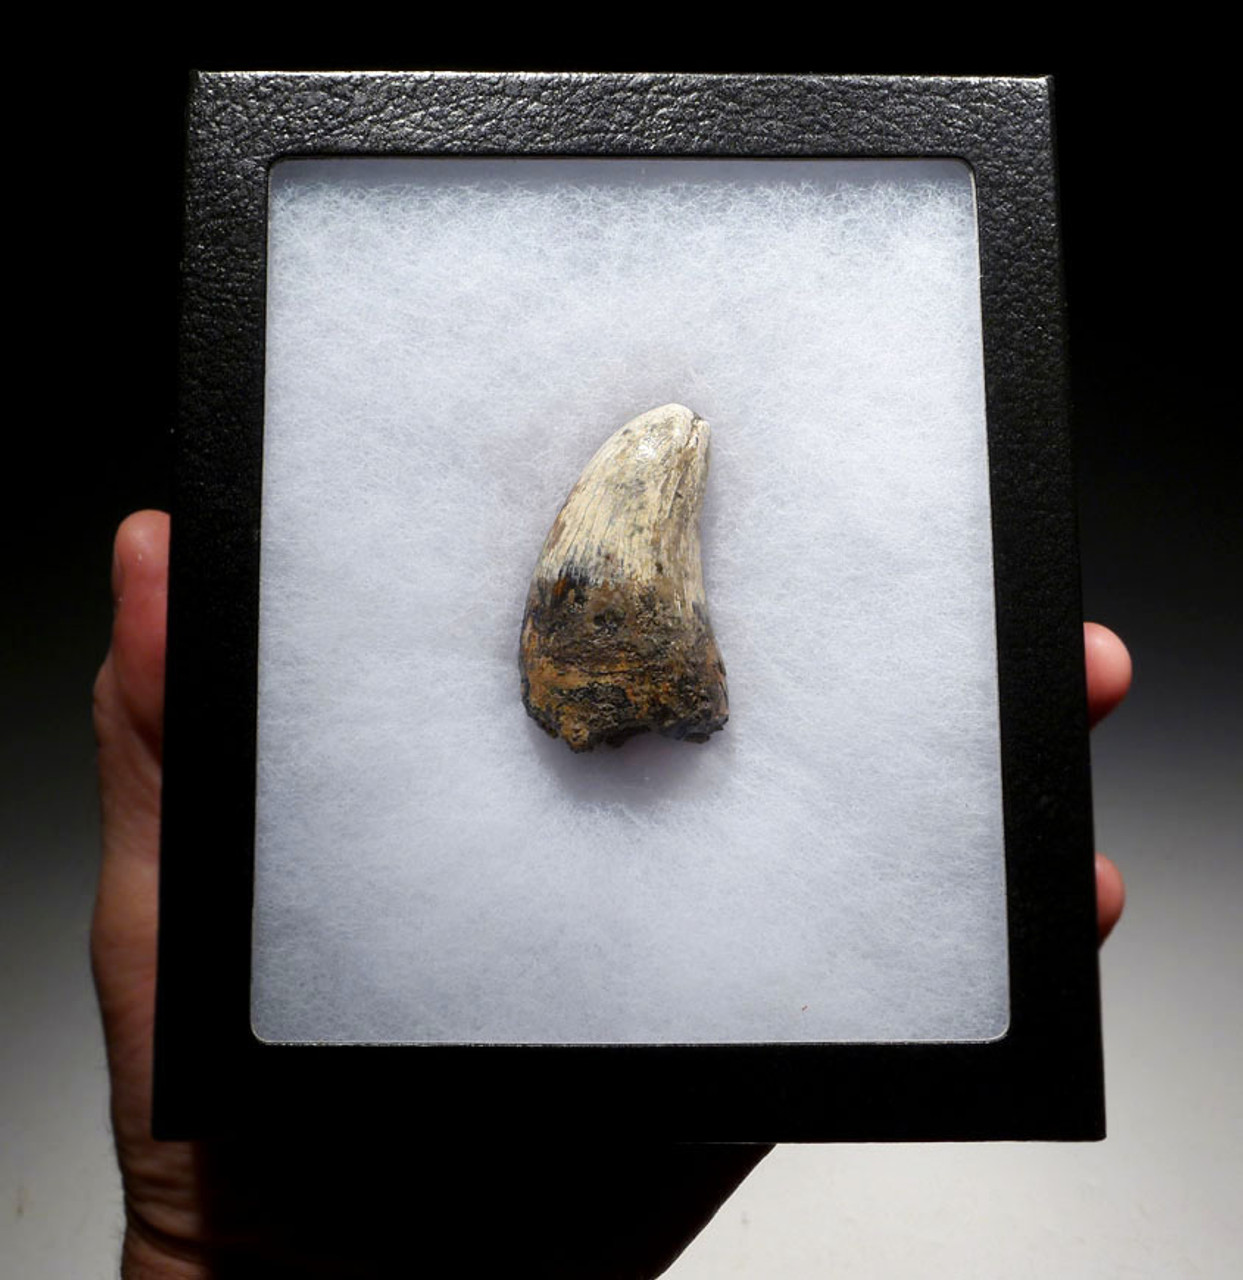 OUR LARGEST AND FINEST FOSSIL TOOTH FROM A JAVA MAN KILLER PREHISTORIC CROCODILE OF THE FAMOUS HOMO ERECTUS DEPOSITS OF SOLO RIVER INDONESIA *CROC049